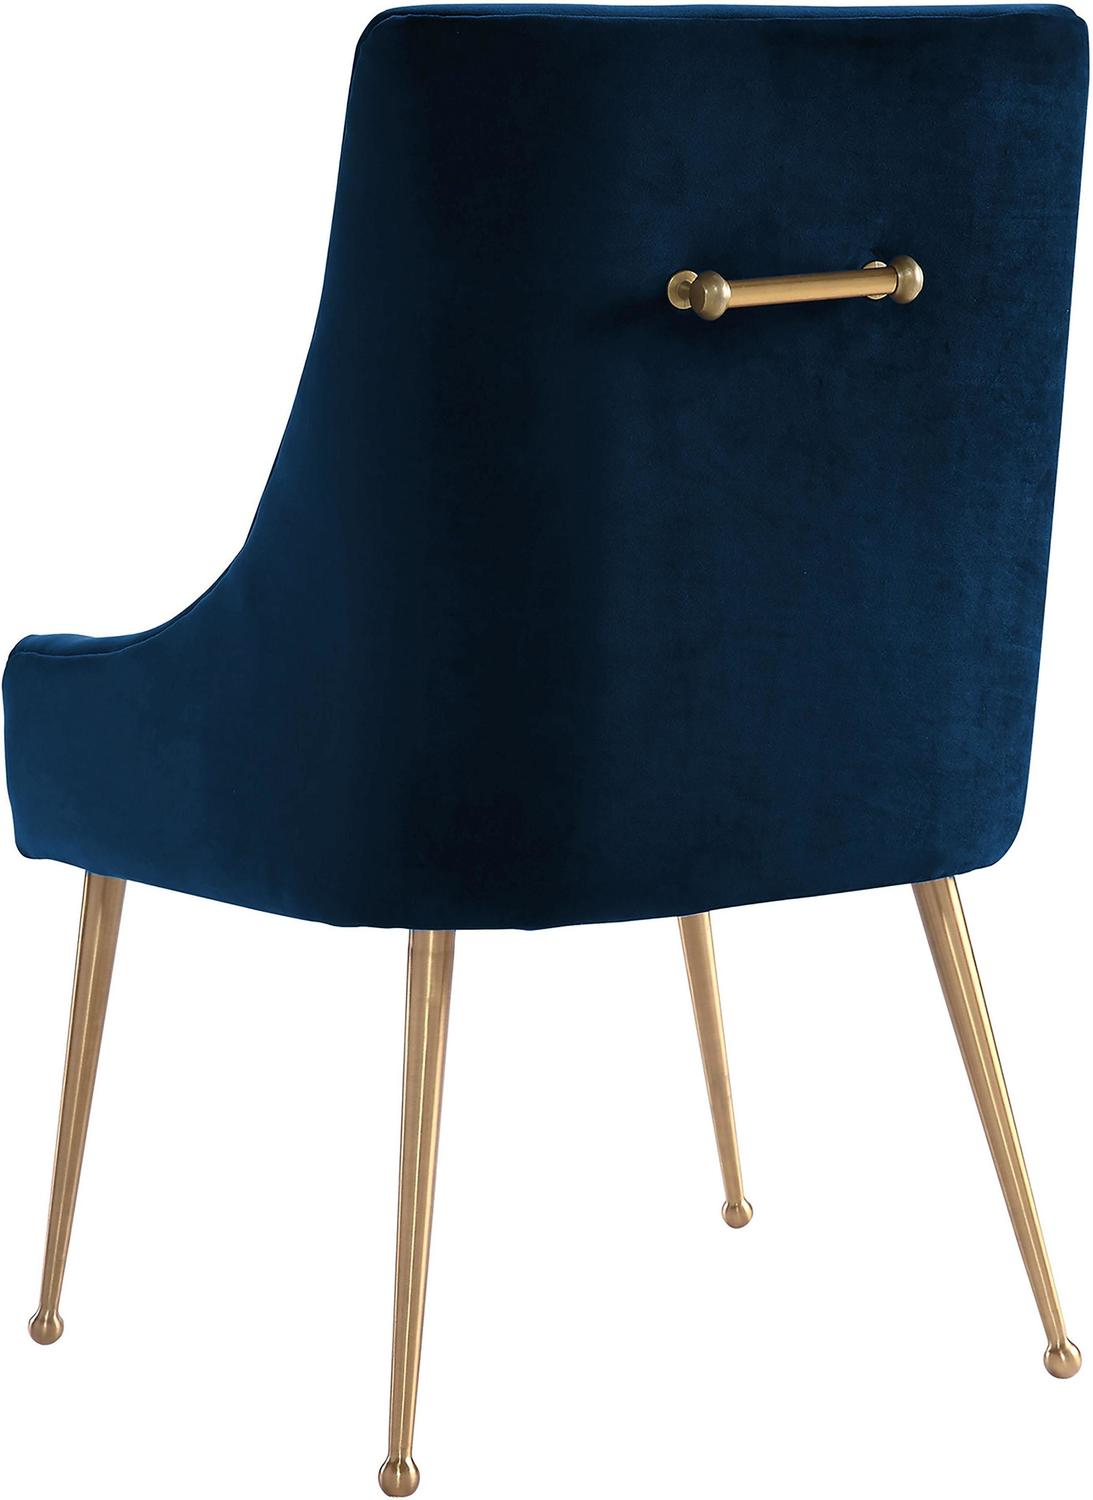 black arm chair Contemporary Design Furniture Dining Chairs Navy